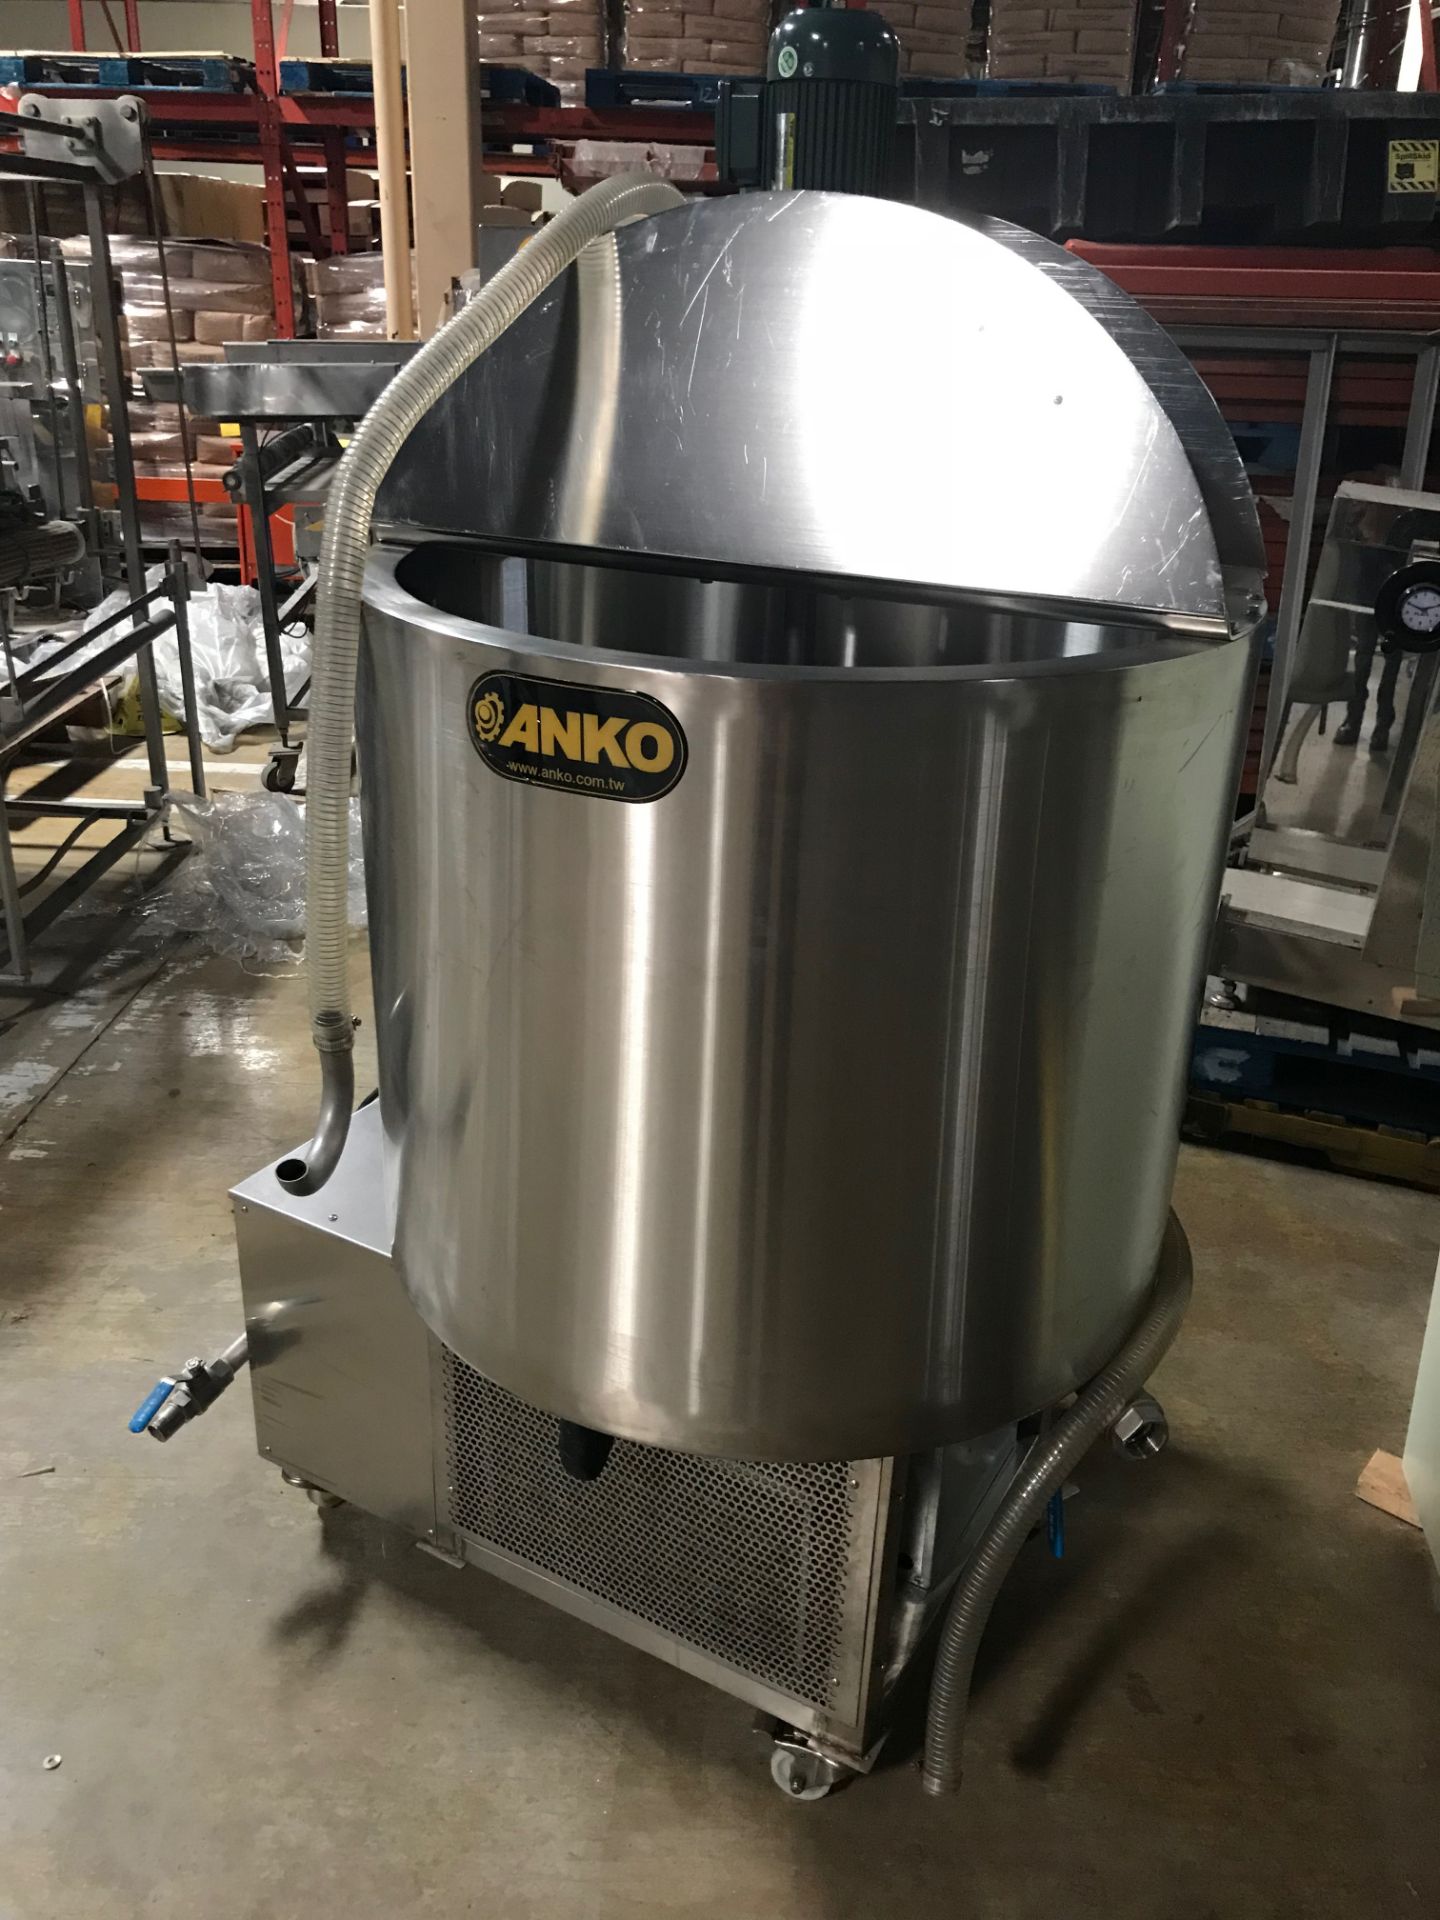 NEW Anko Stainless Steel Mixer with Discharge Pump, 31 Inch Diameter x 3 Feet Tall, 220 Volts, 60Hz, - Image 2 of 4